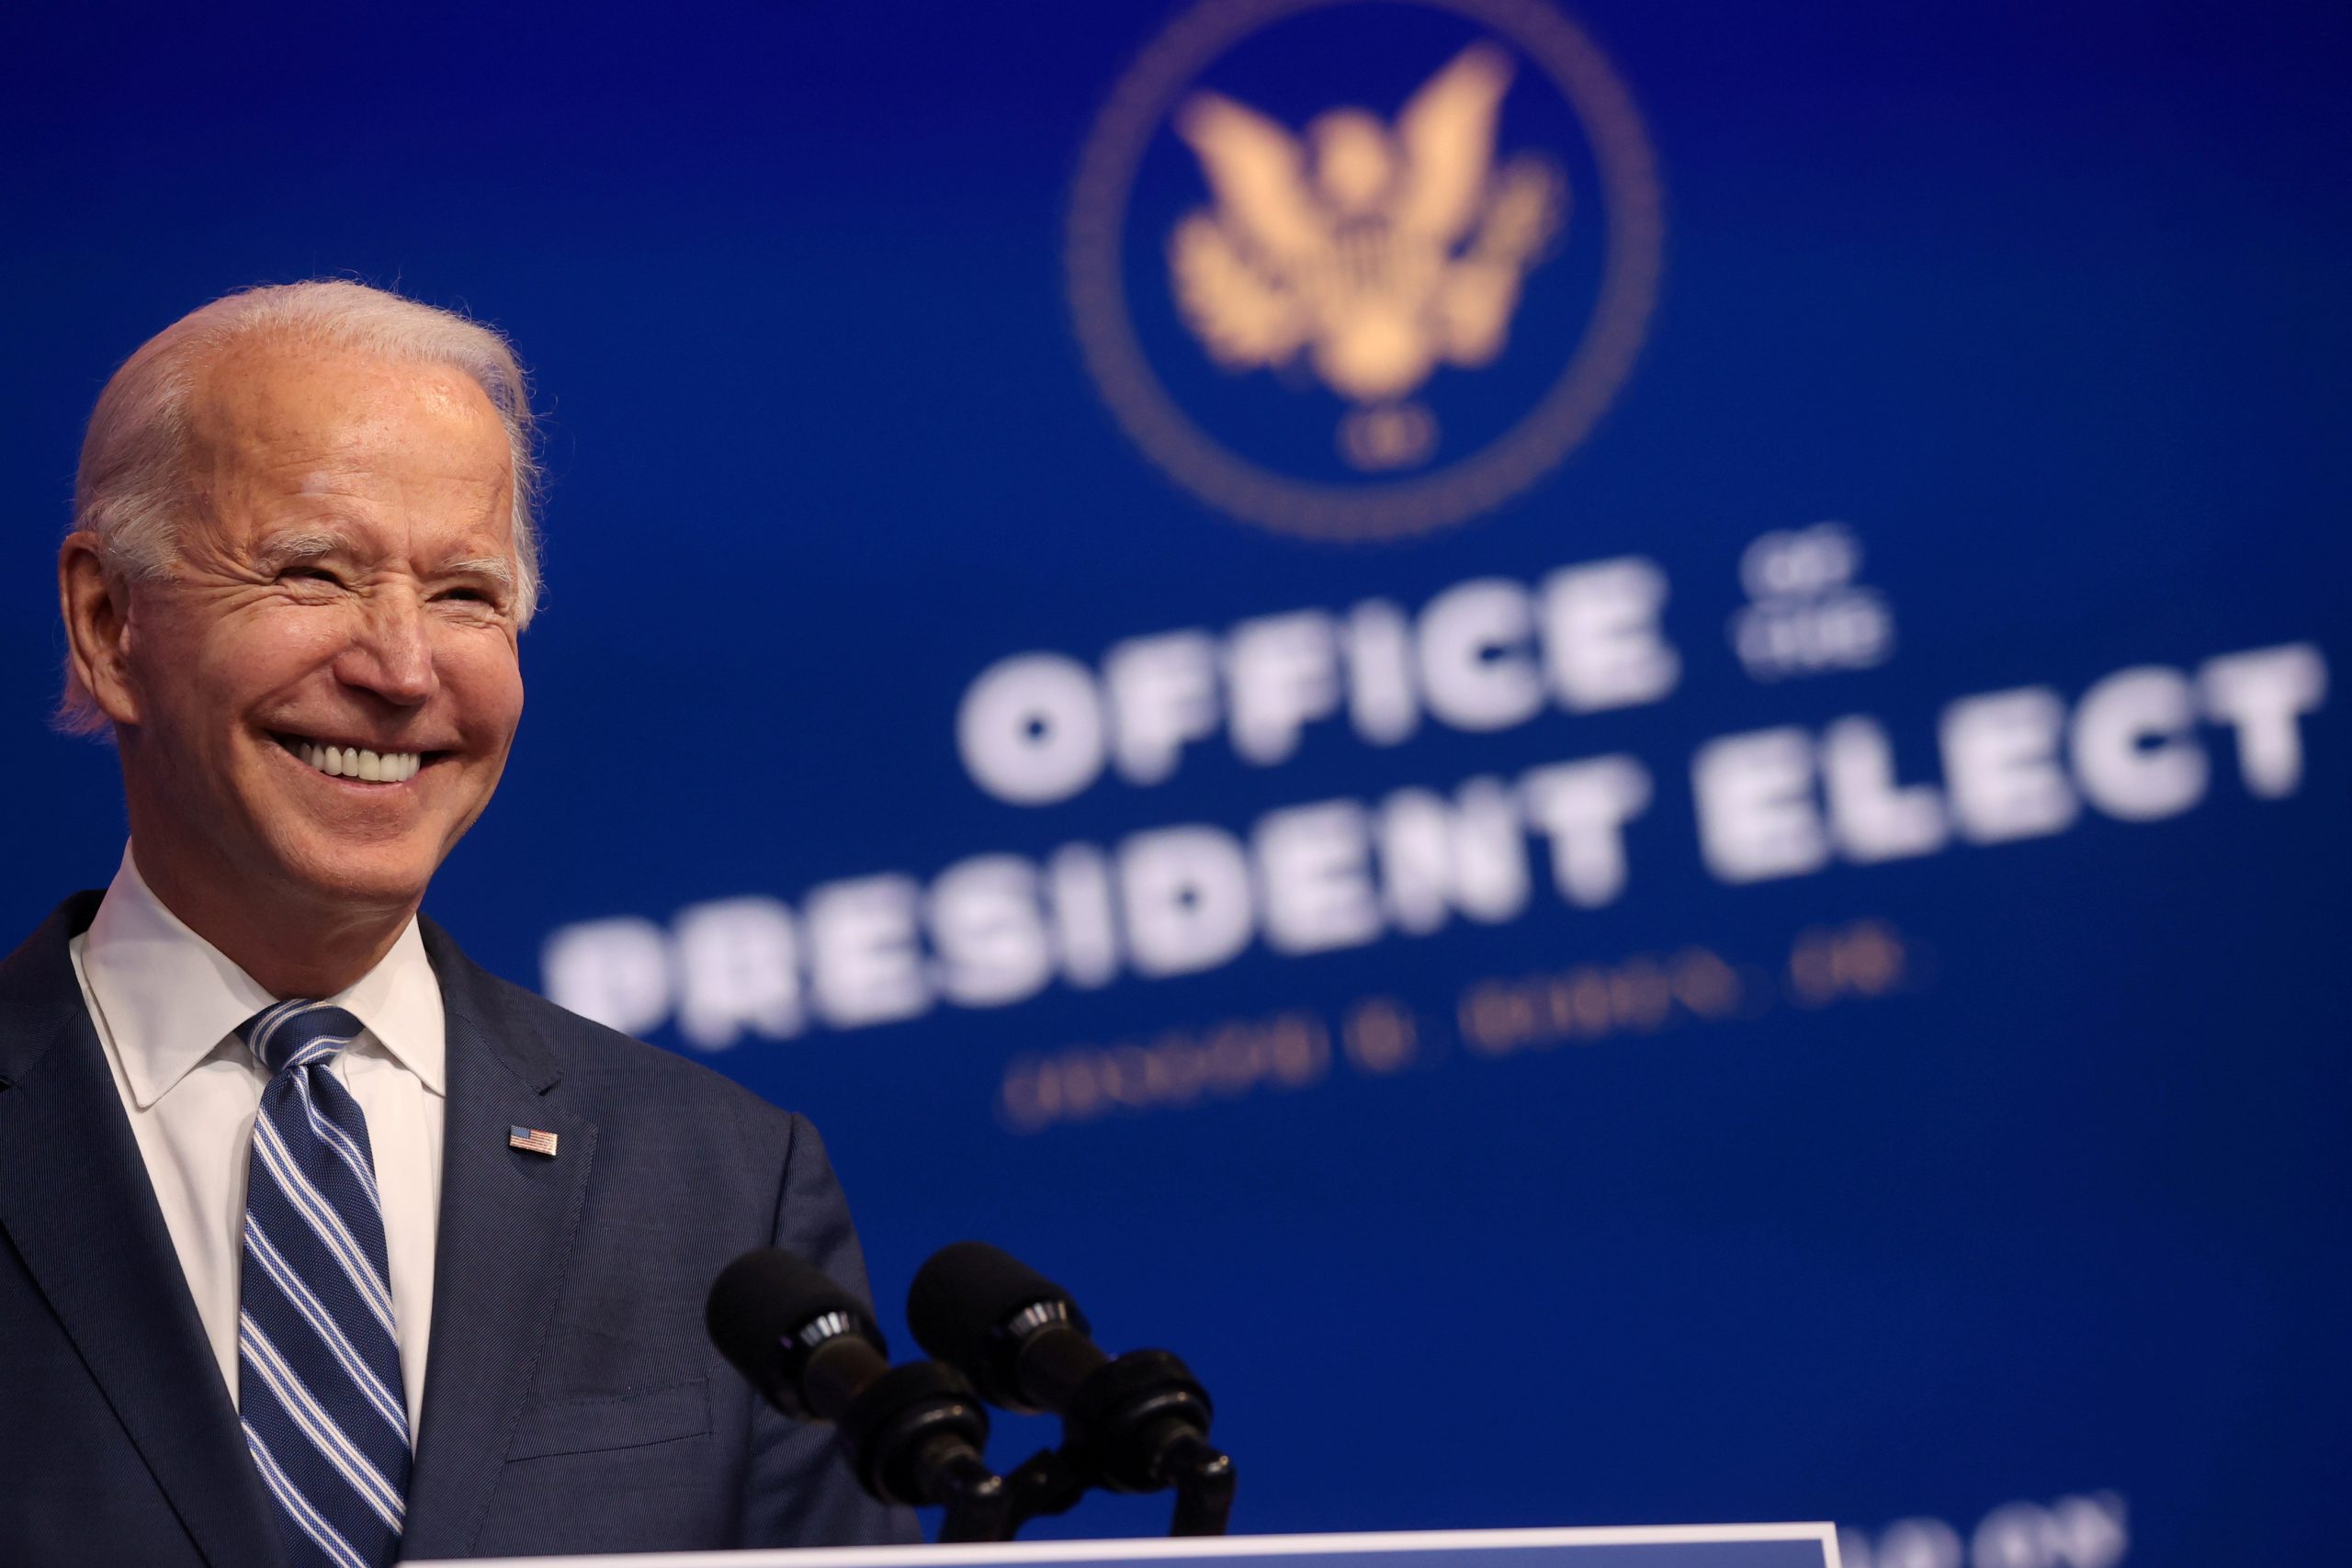 How the Biden Administration will impact Middle East economies - Atlantic Council